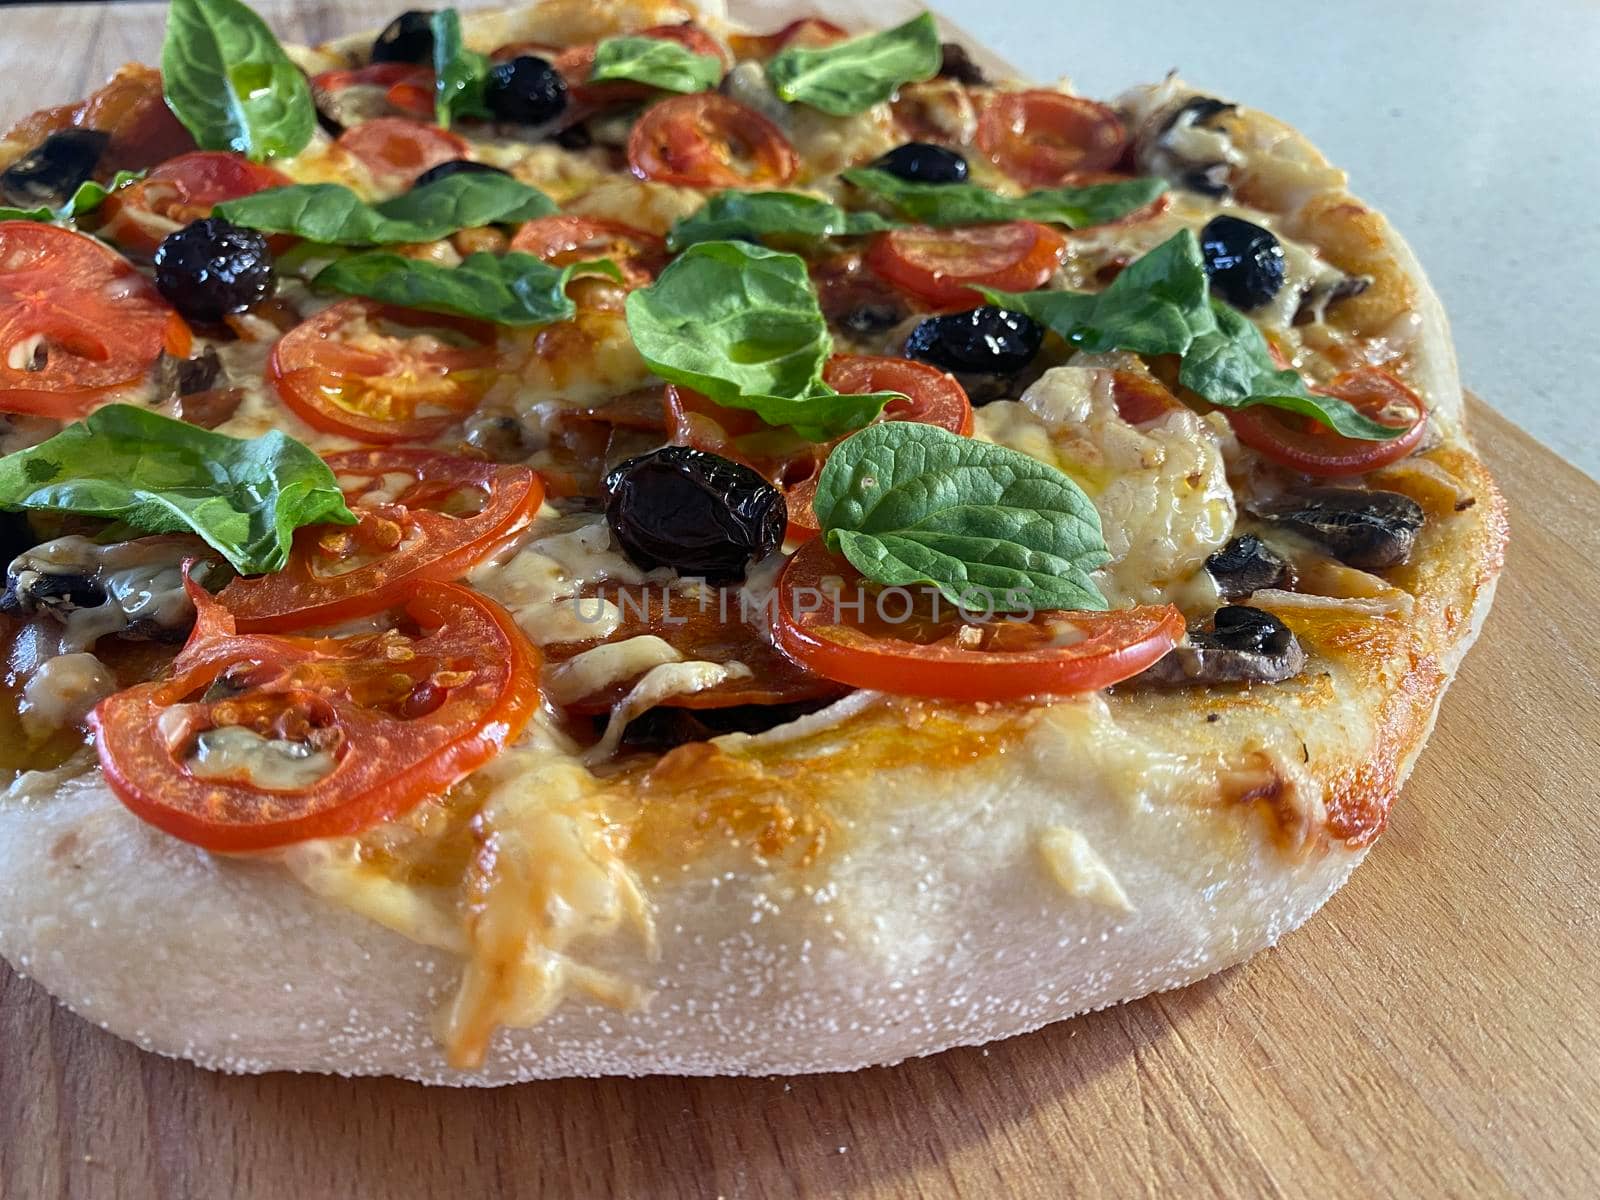 Delicious freshly baked pizza, just out of the oven on a wooden board.